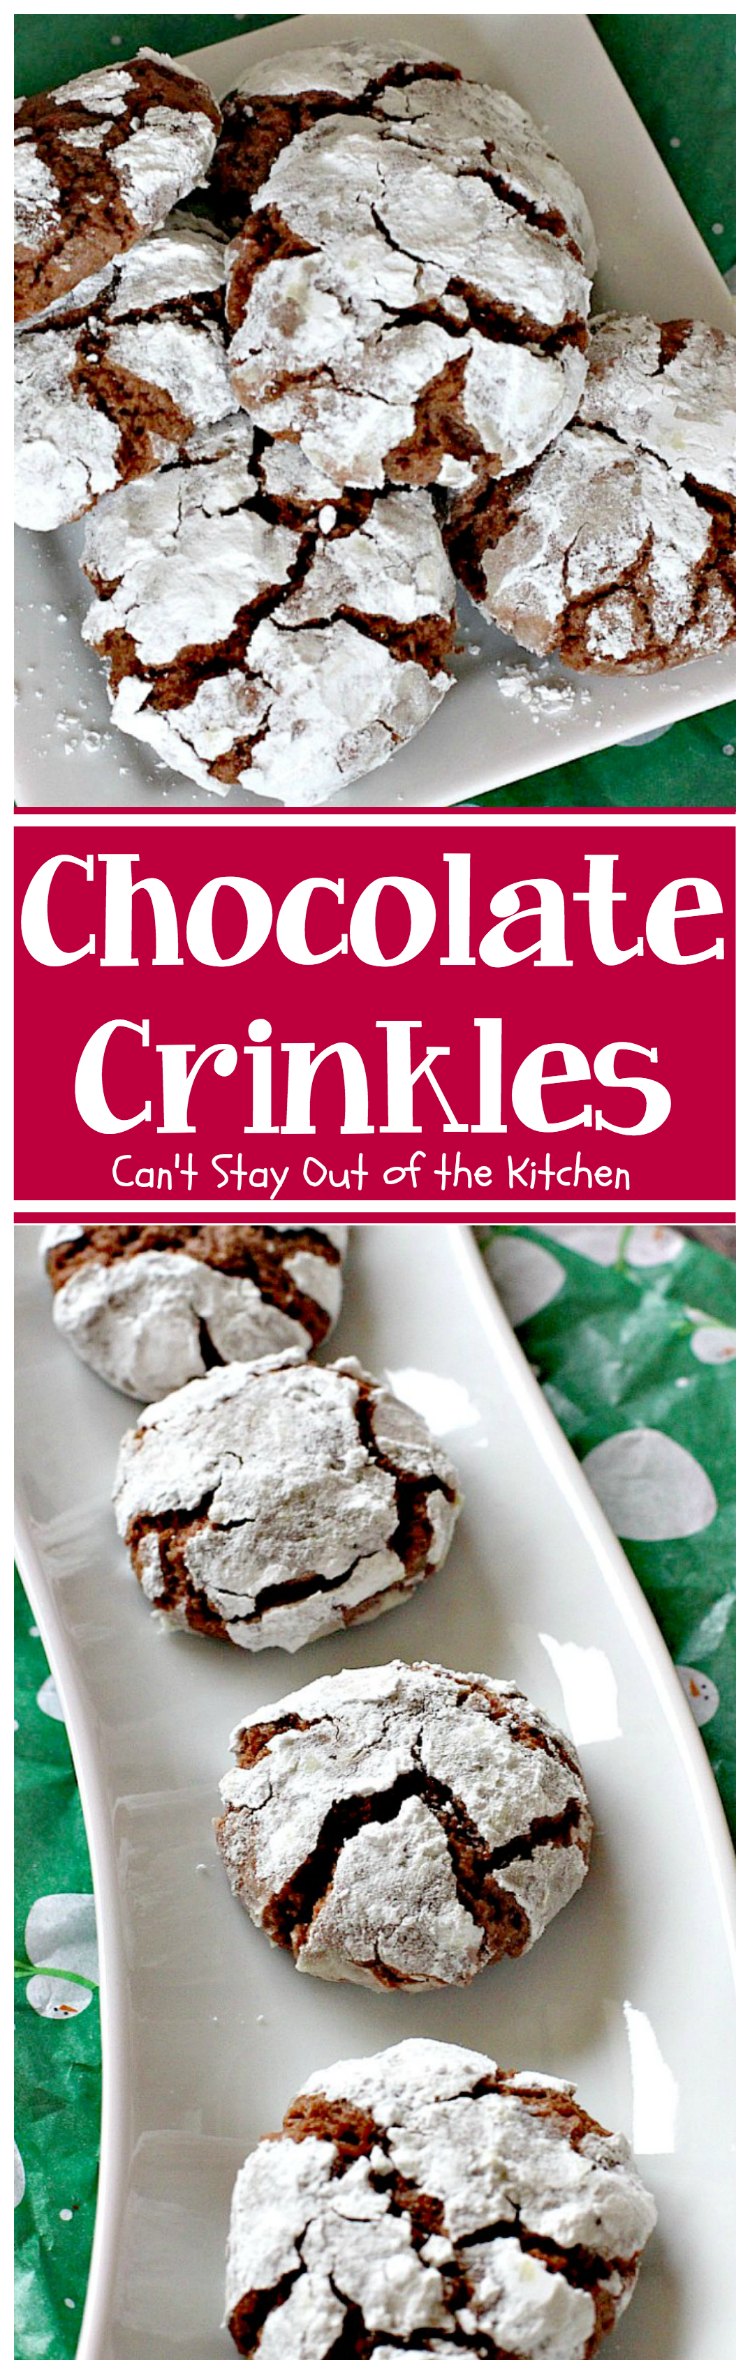 Chocolate Crinkles | Can't Stay Out of the Kitchen